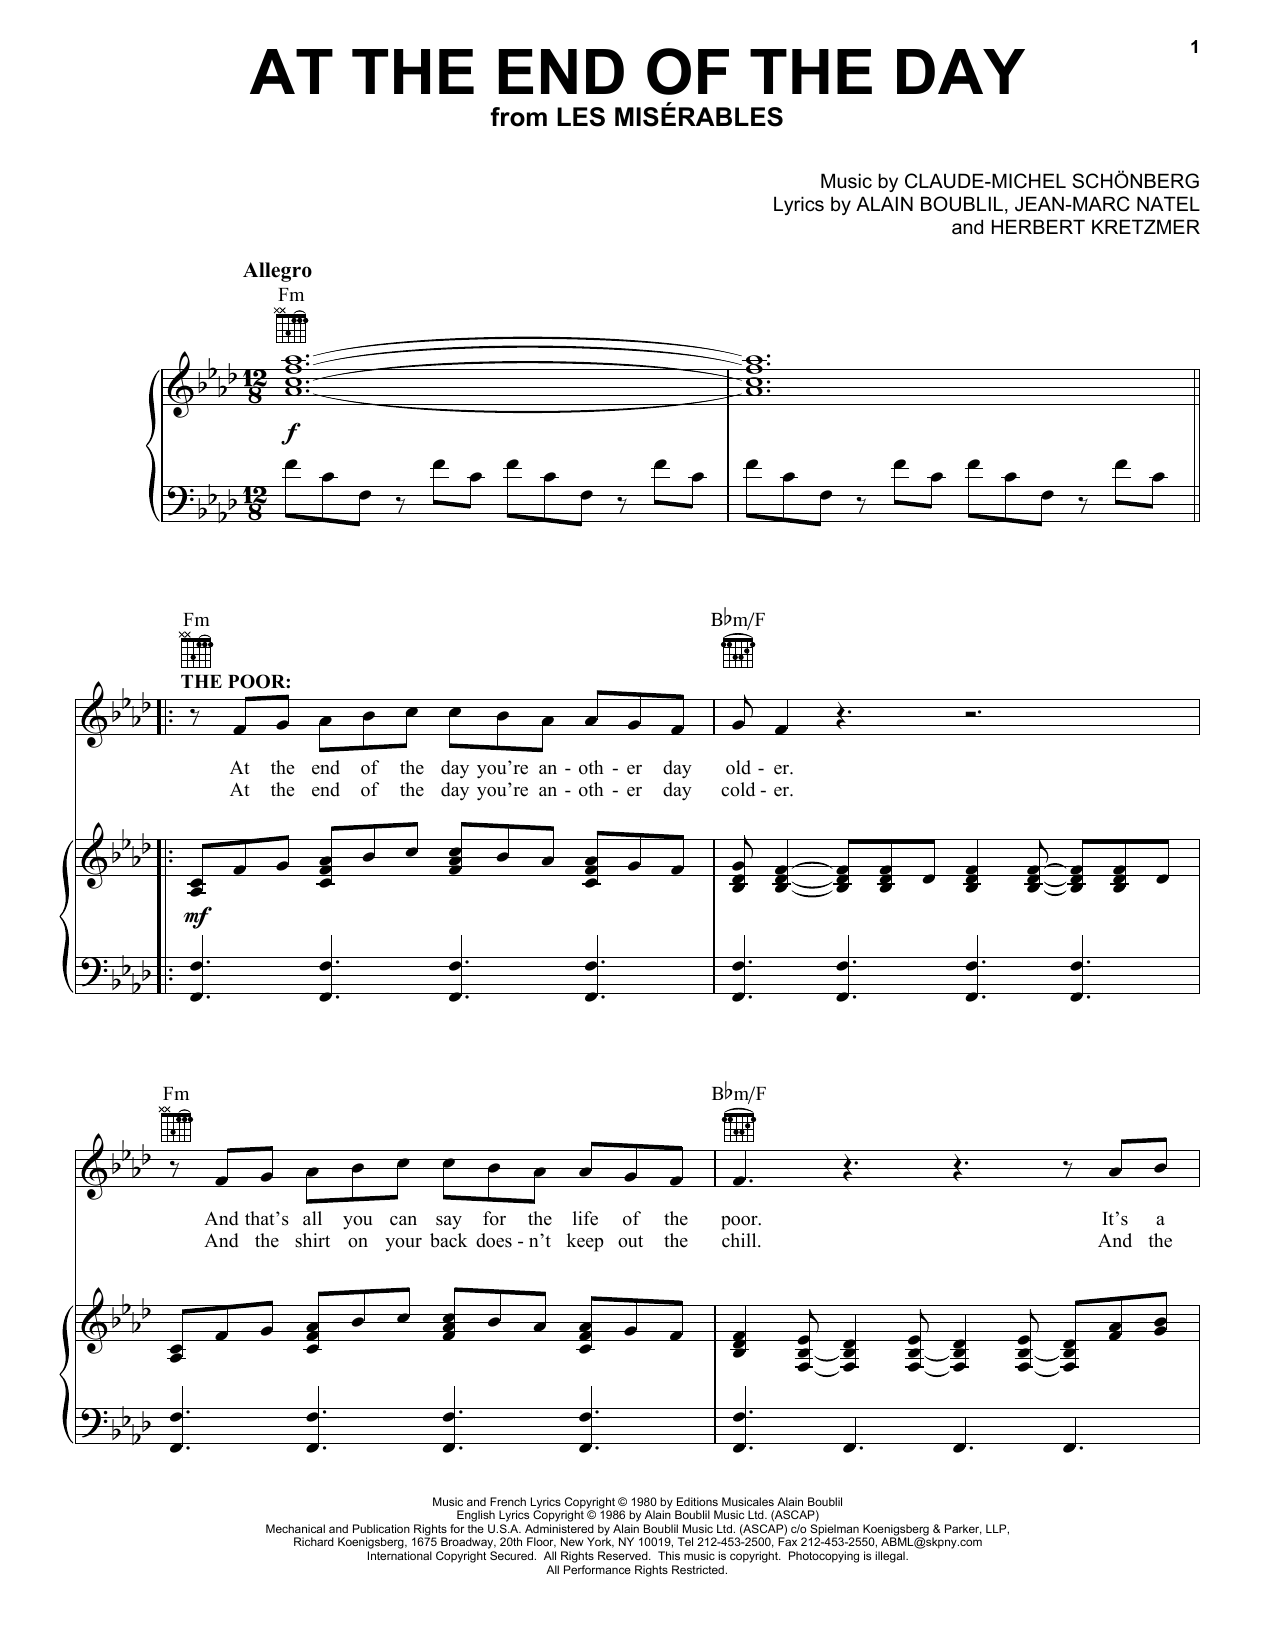 Alain Boublil At The End Of The Day sheet music notes and chords. Download Printable PDF.